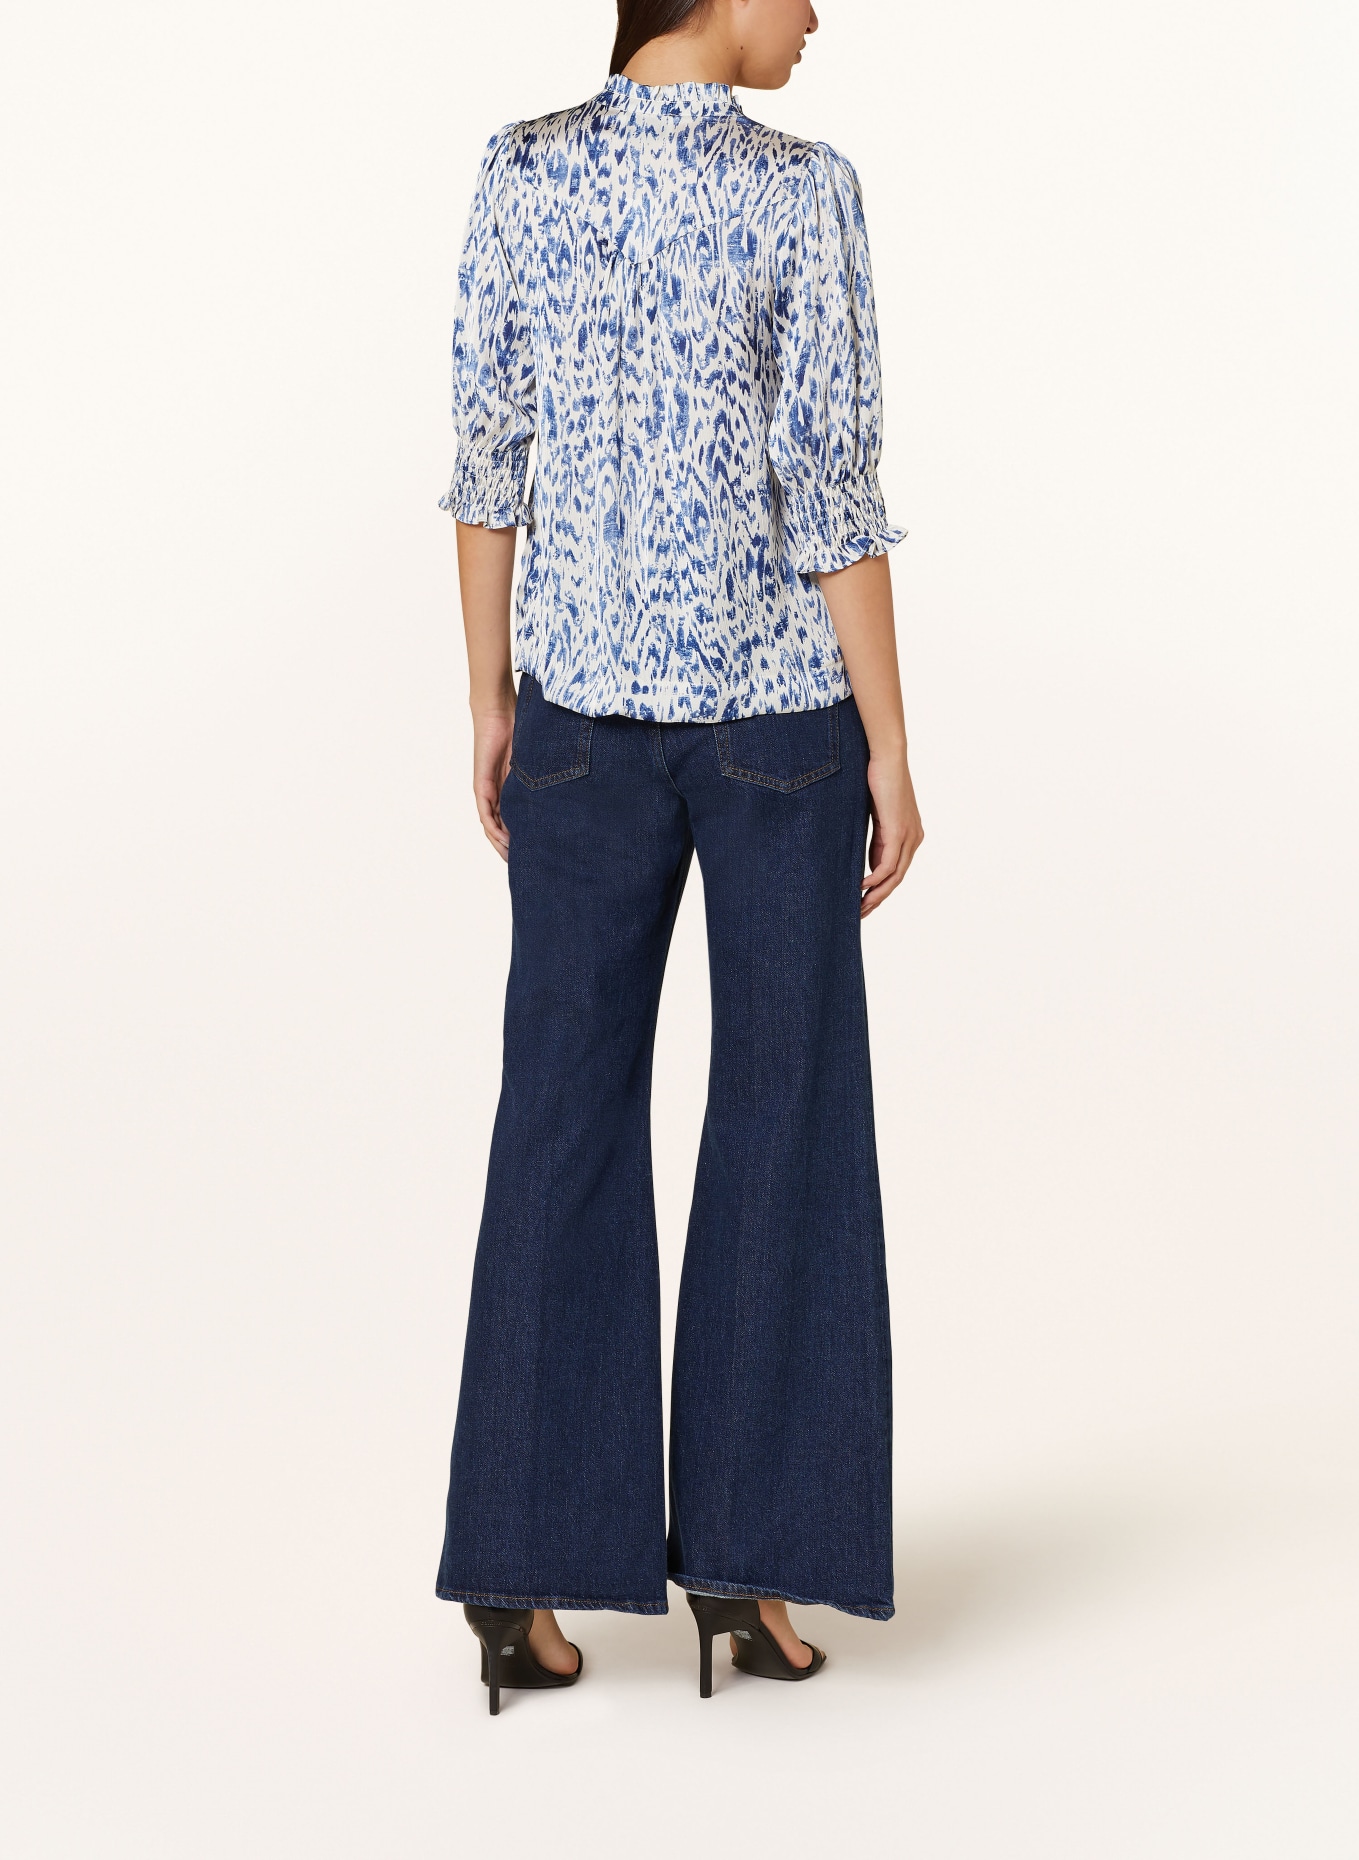 NEO NOIR Blouse DIANA with 3/4 sleeves, Color: BLUE/ WHITE (Image 3)